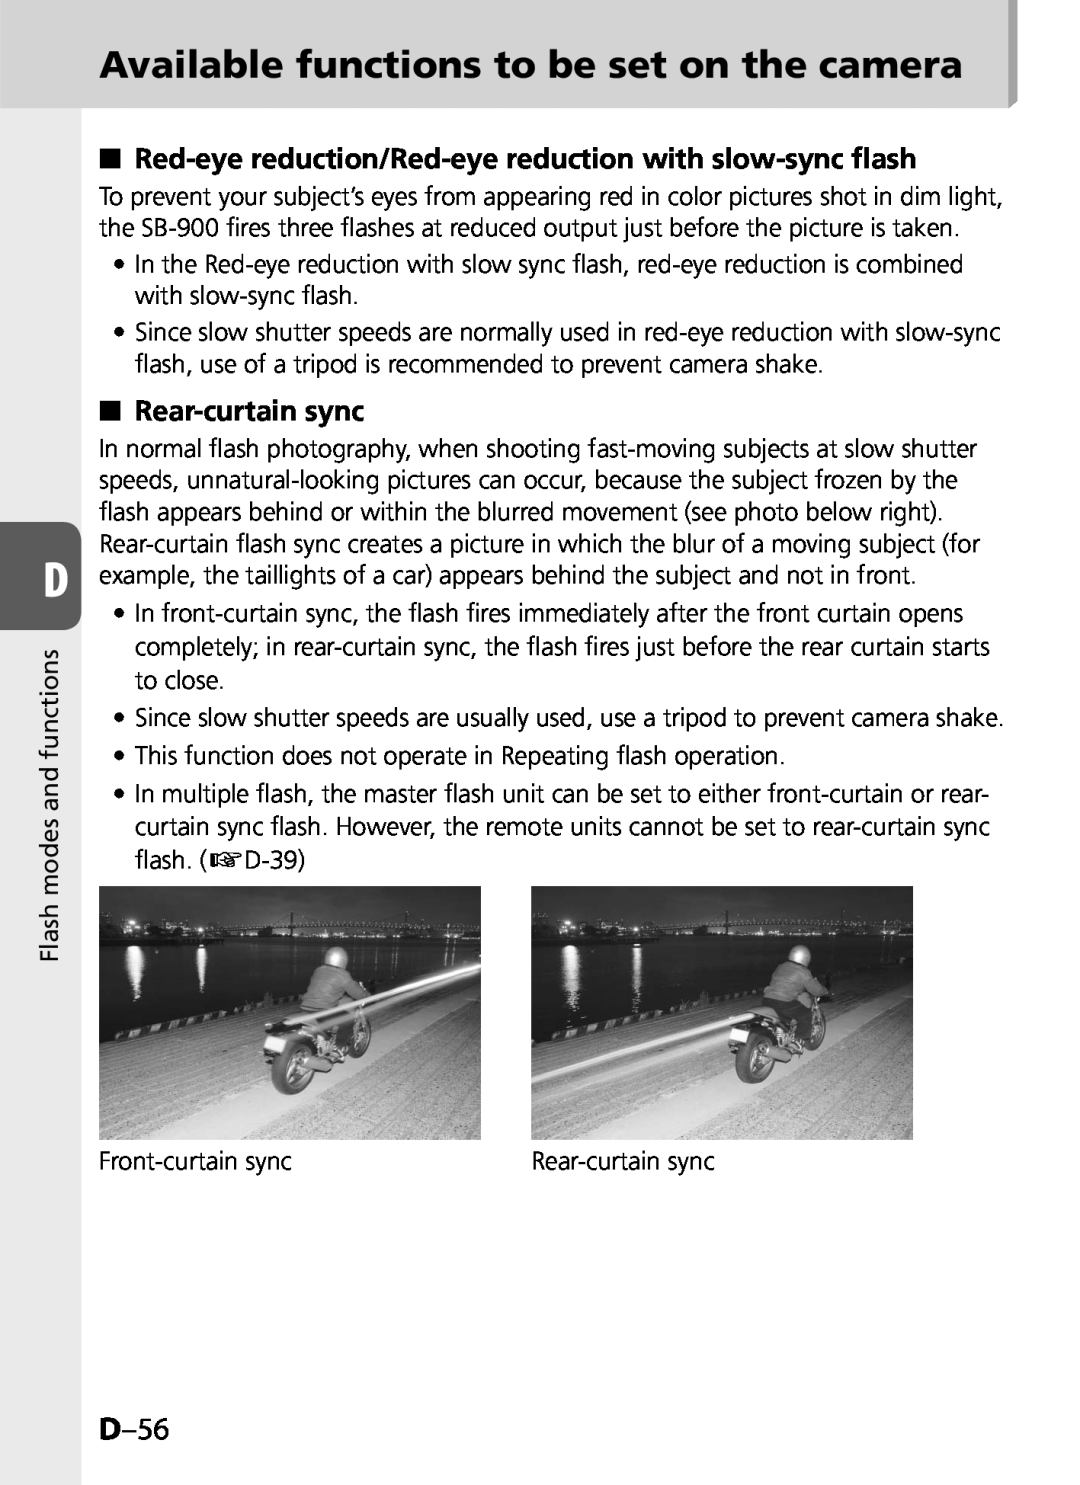 Univex SB-900 user manual Available functions to be set on the camera, D–56, Rear-curtainsync 